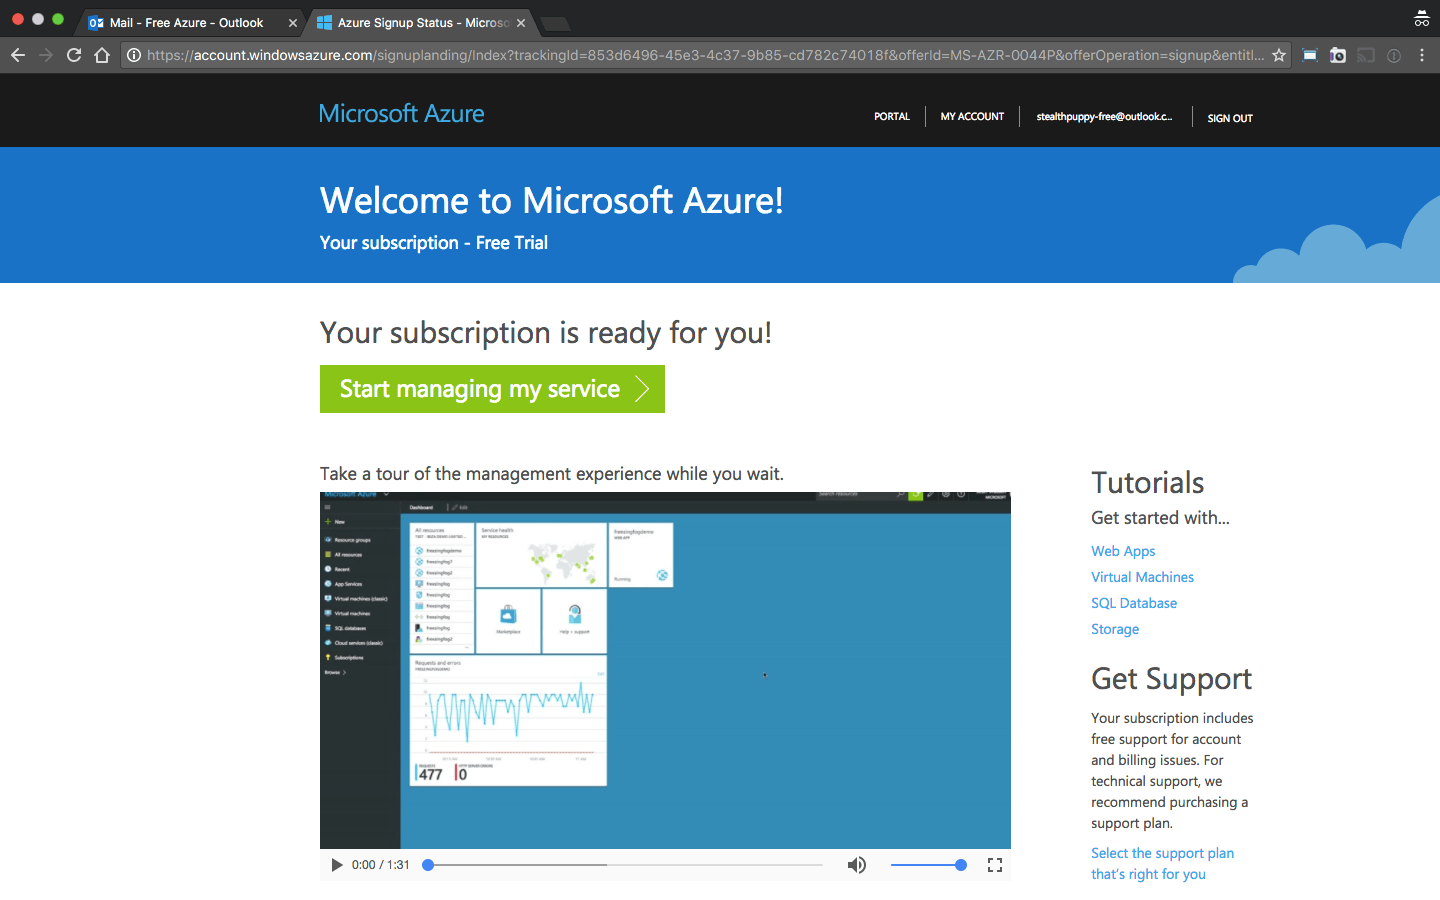 The Azure subscription is ready to use